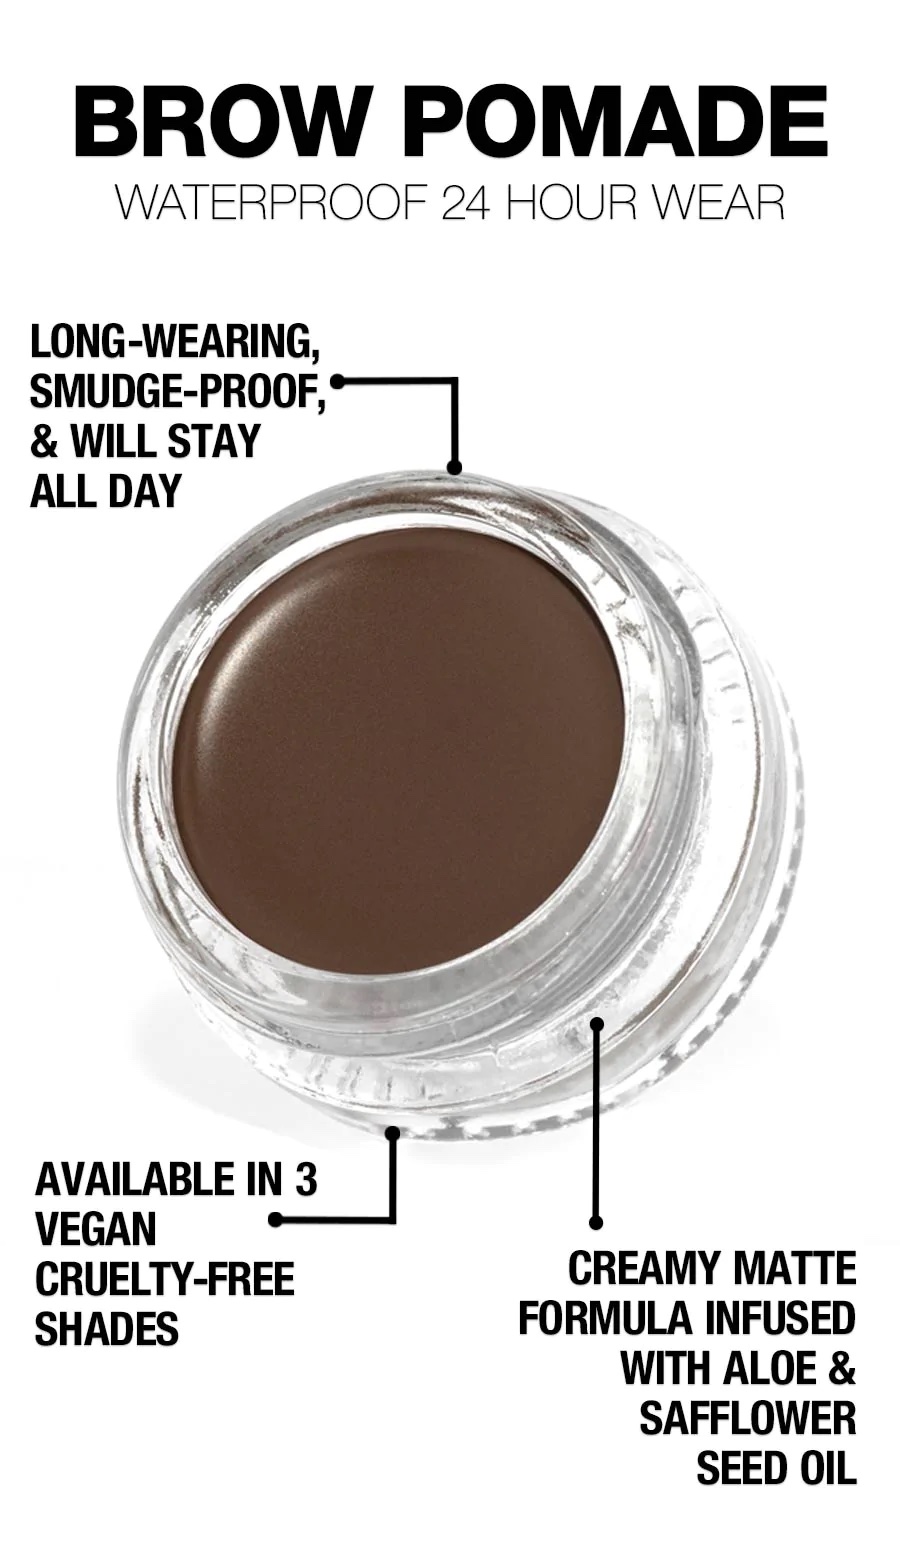 mobile-waterproof-brow-pomade-ebc-additional-product-information-1400x.jpg